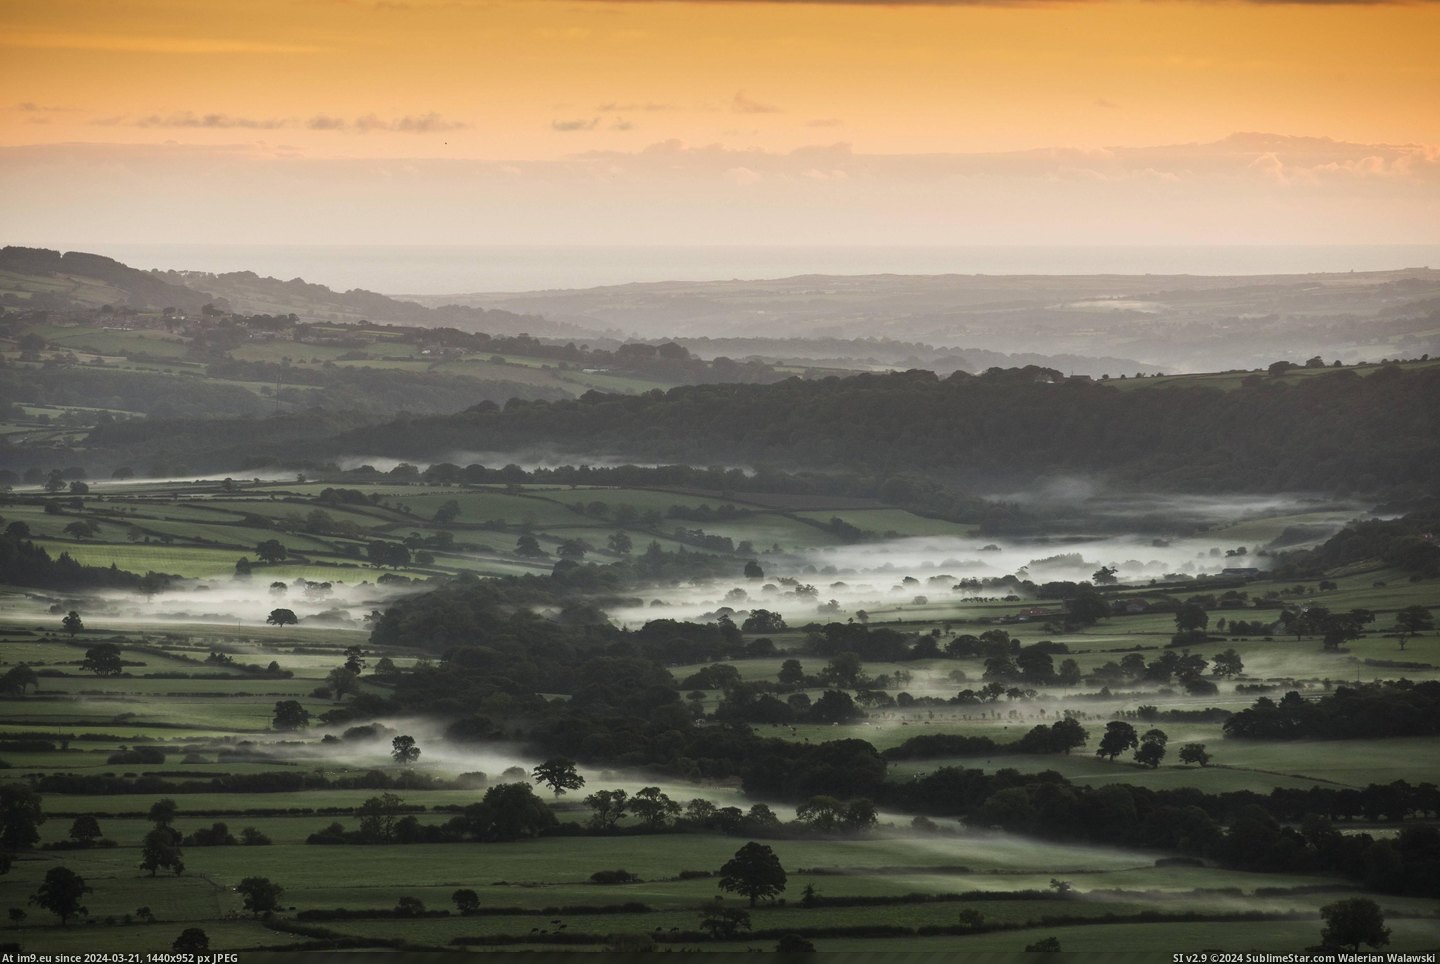 #Valley #North #Sunrise #Moors #Goathland #Lies #Mist #Yorkshire [Earthporn] Mist lies in a valley near Goathland in the North Yorkshire Moors at sunrise. [4666x3098] Pic. (Obraz z album My r/EARTHPORN favs))